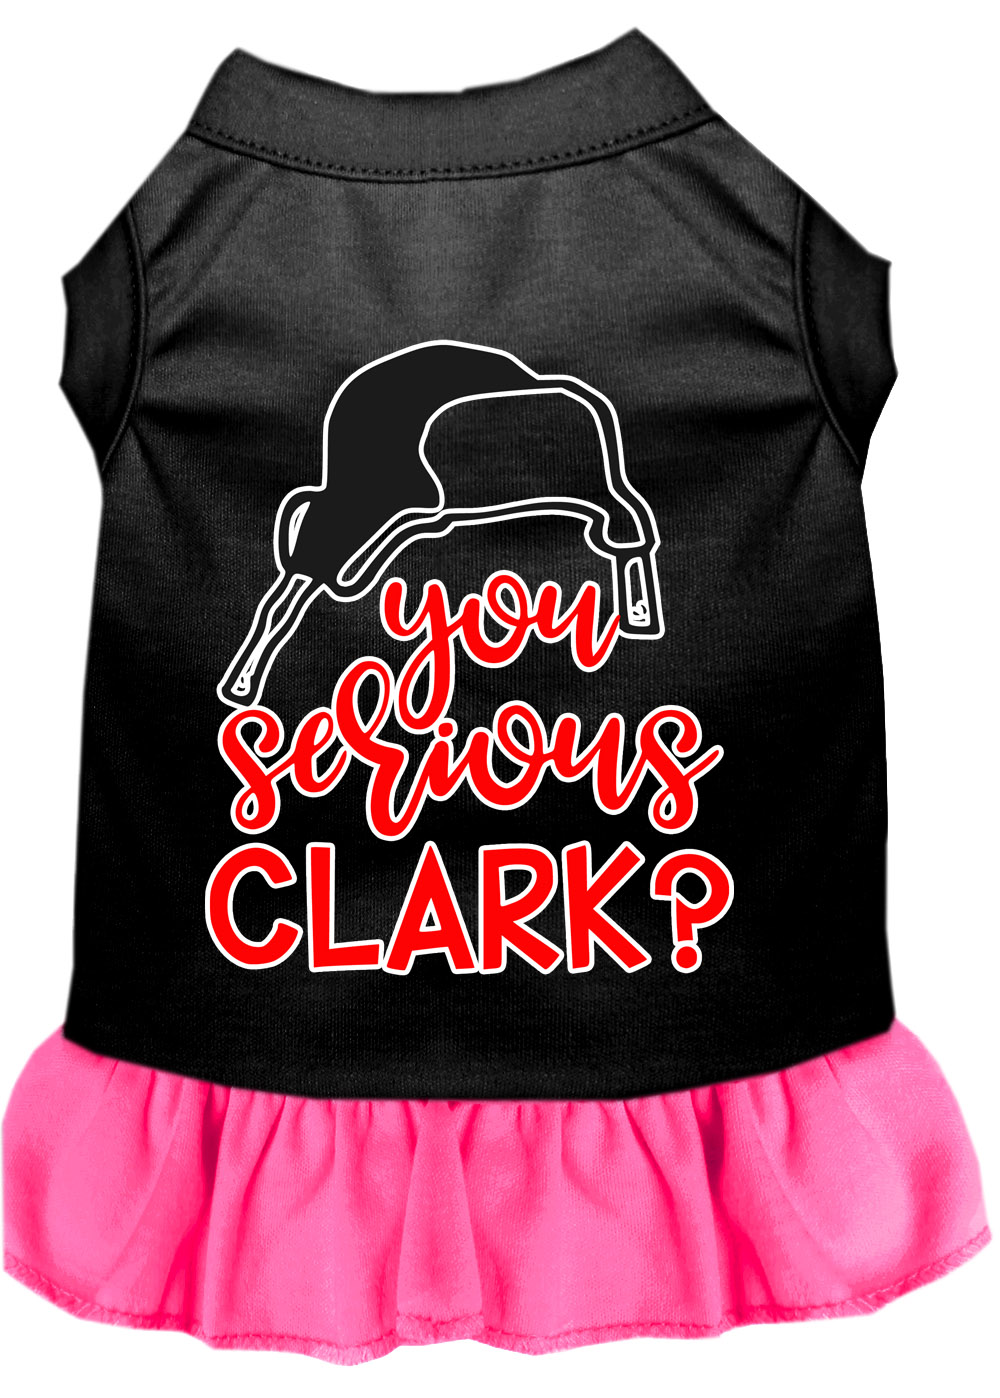 You Serious Clark? Screen Print Dog Dress Black with Bright Pink XS